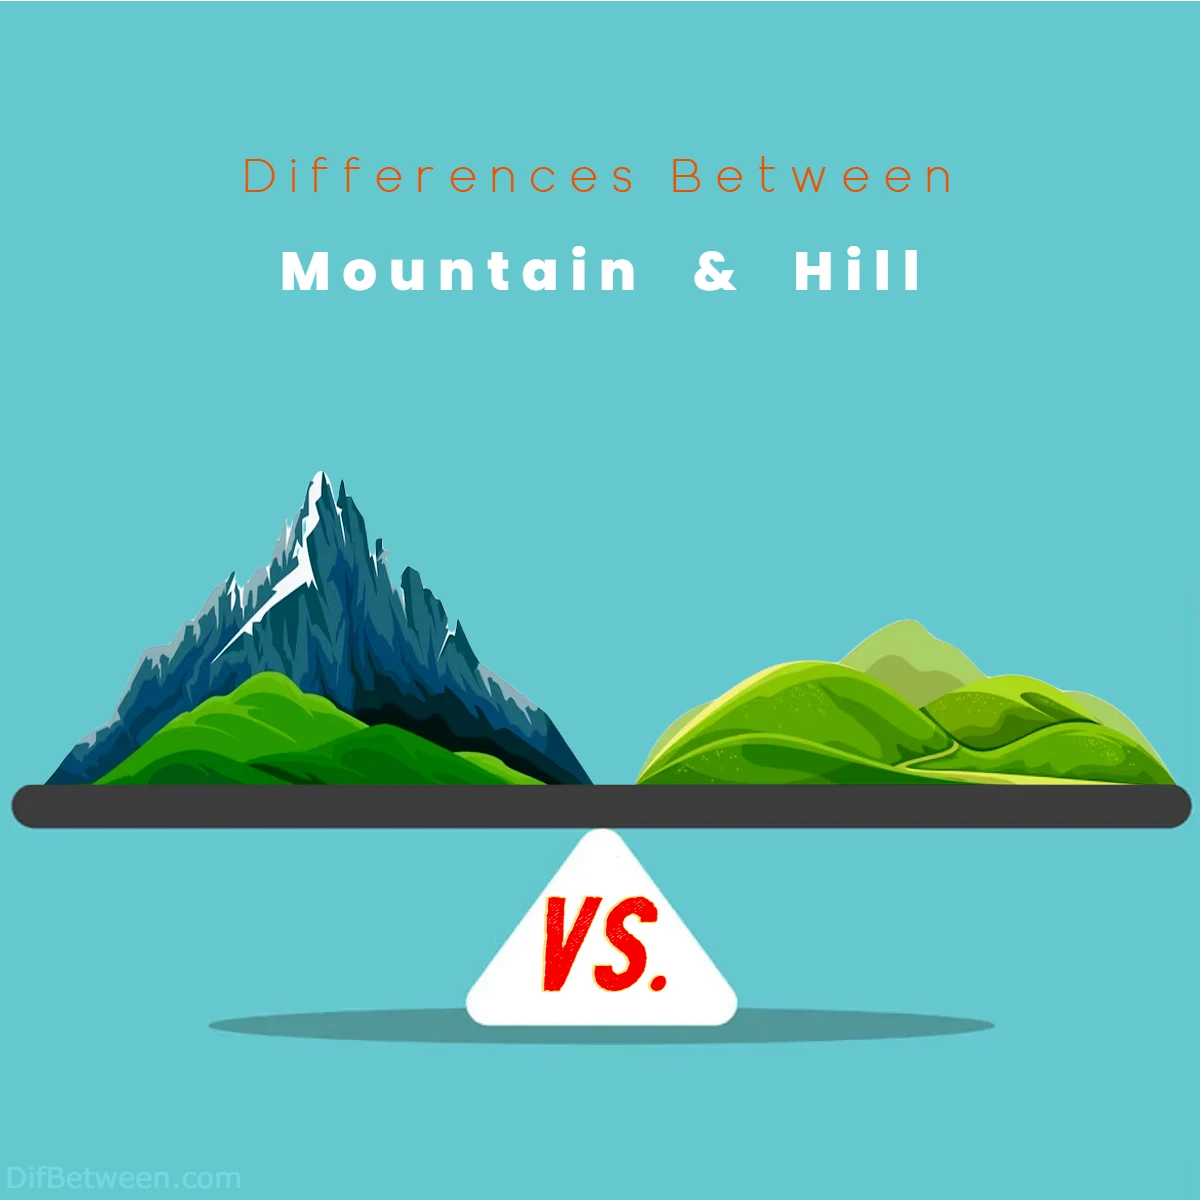 Differences Between Mountain vs Hill